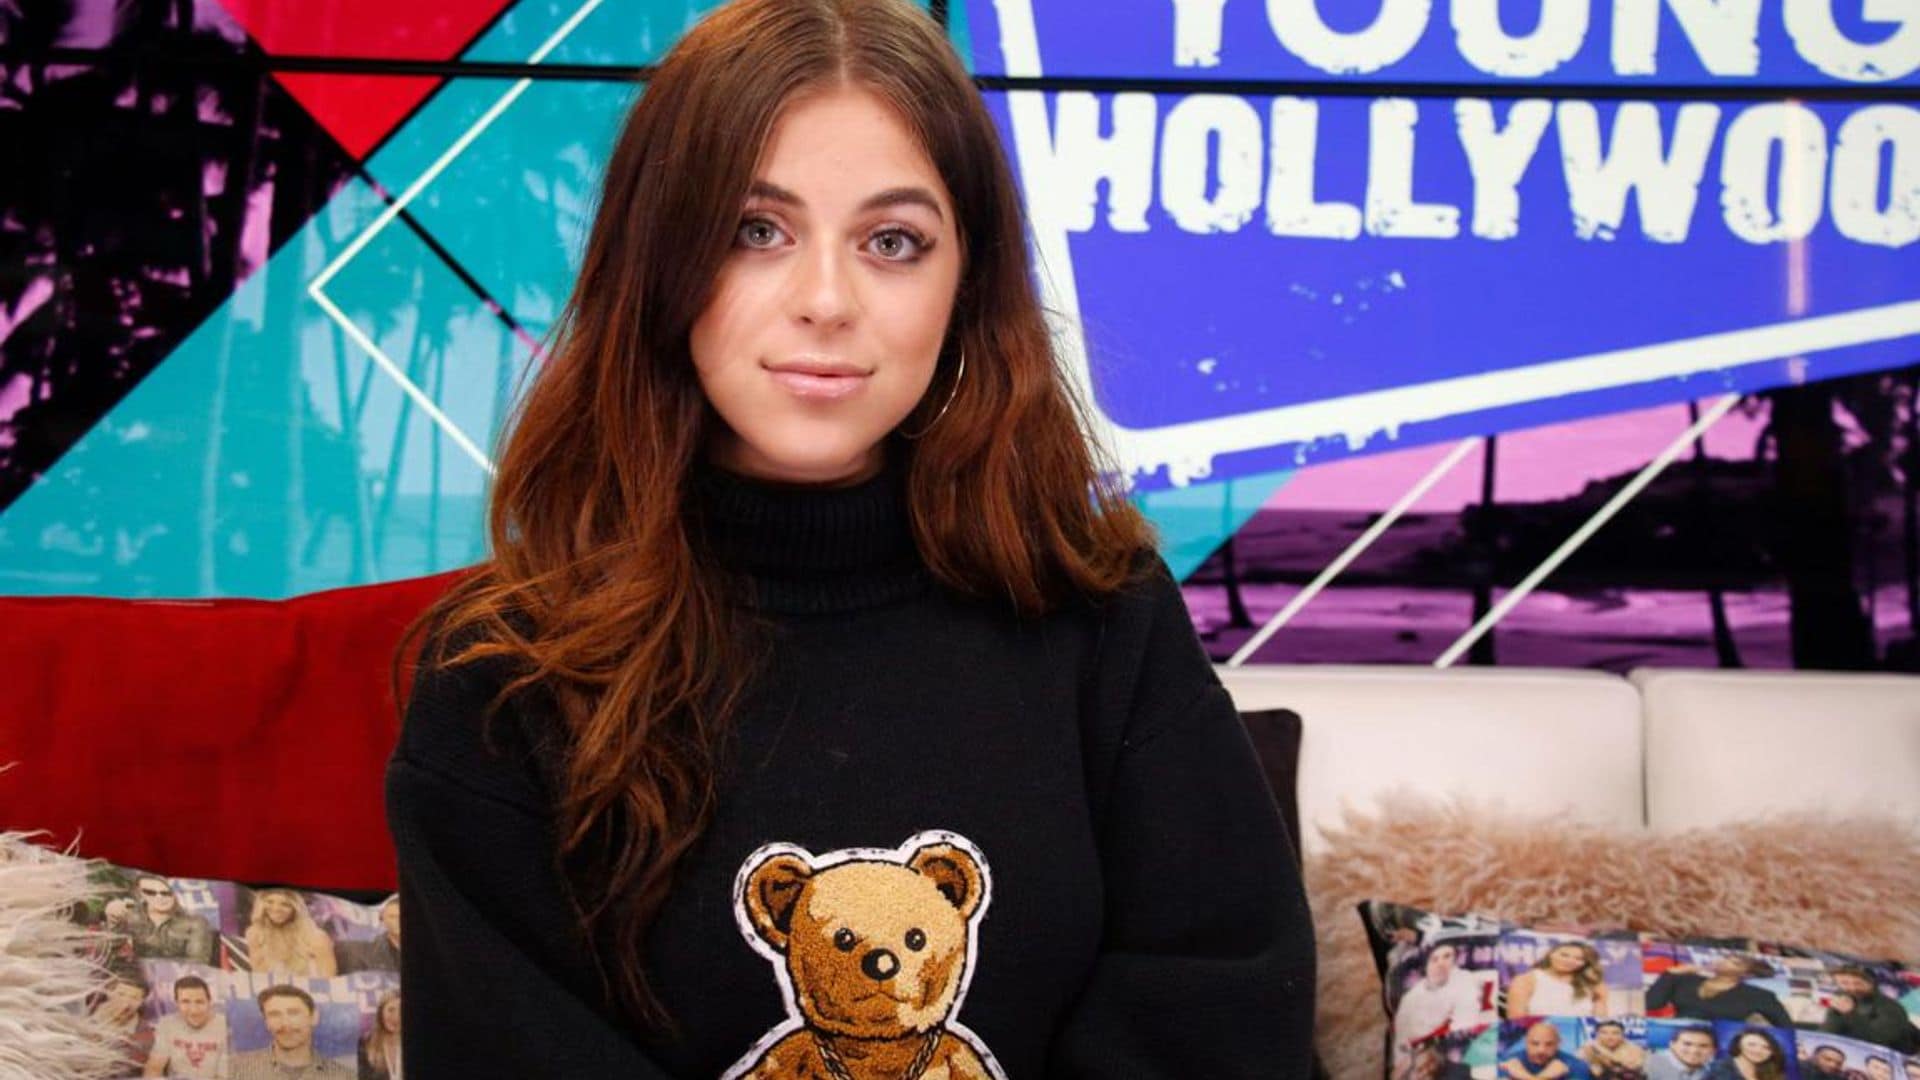 Disney star and influencer ‘Baby’ Ariel Martin talks to us about ‘Zombies 2’ and what Selena Gomez taught her